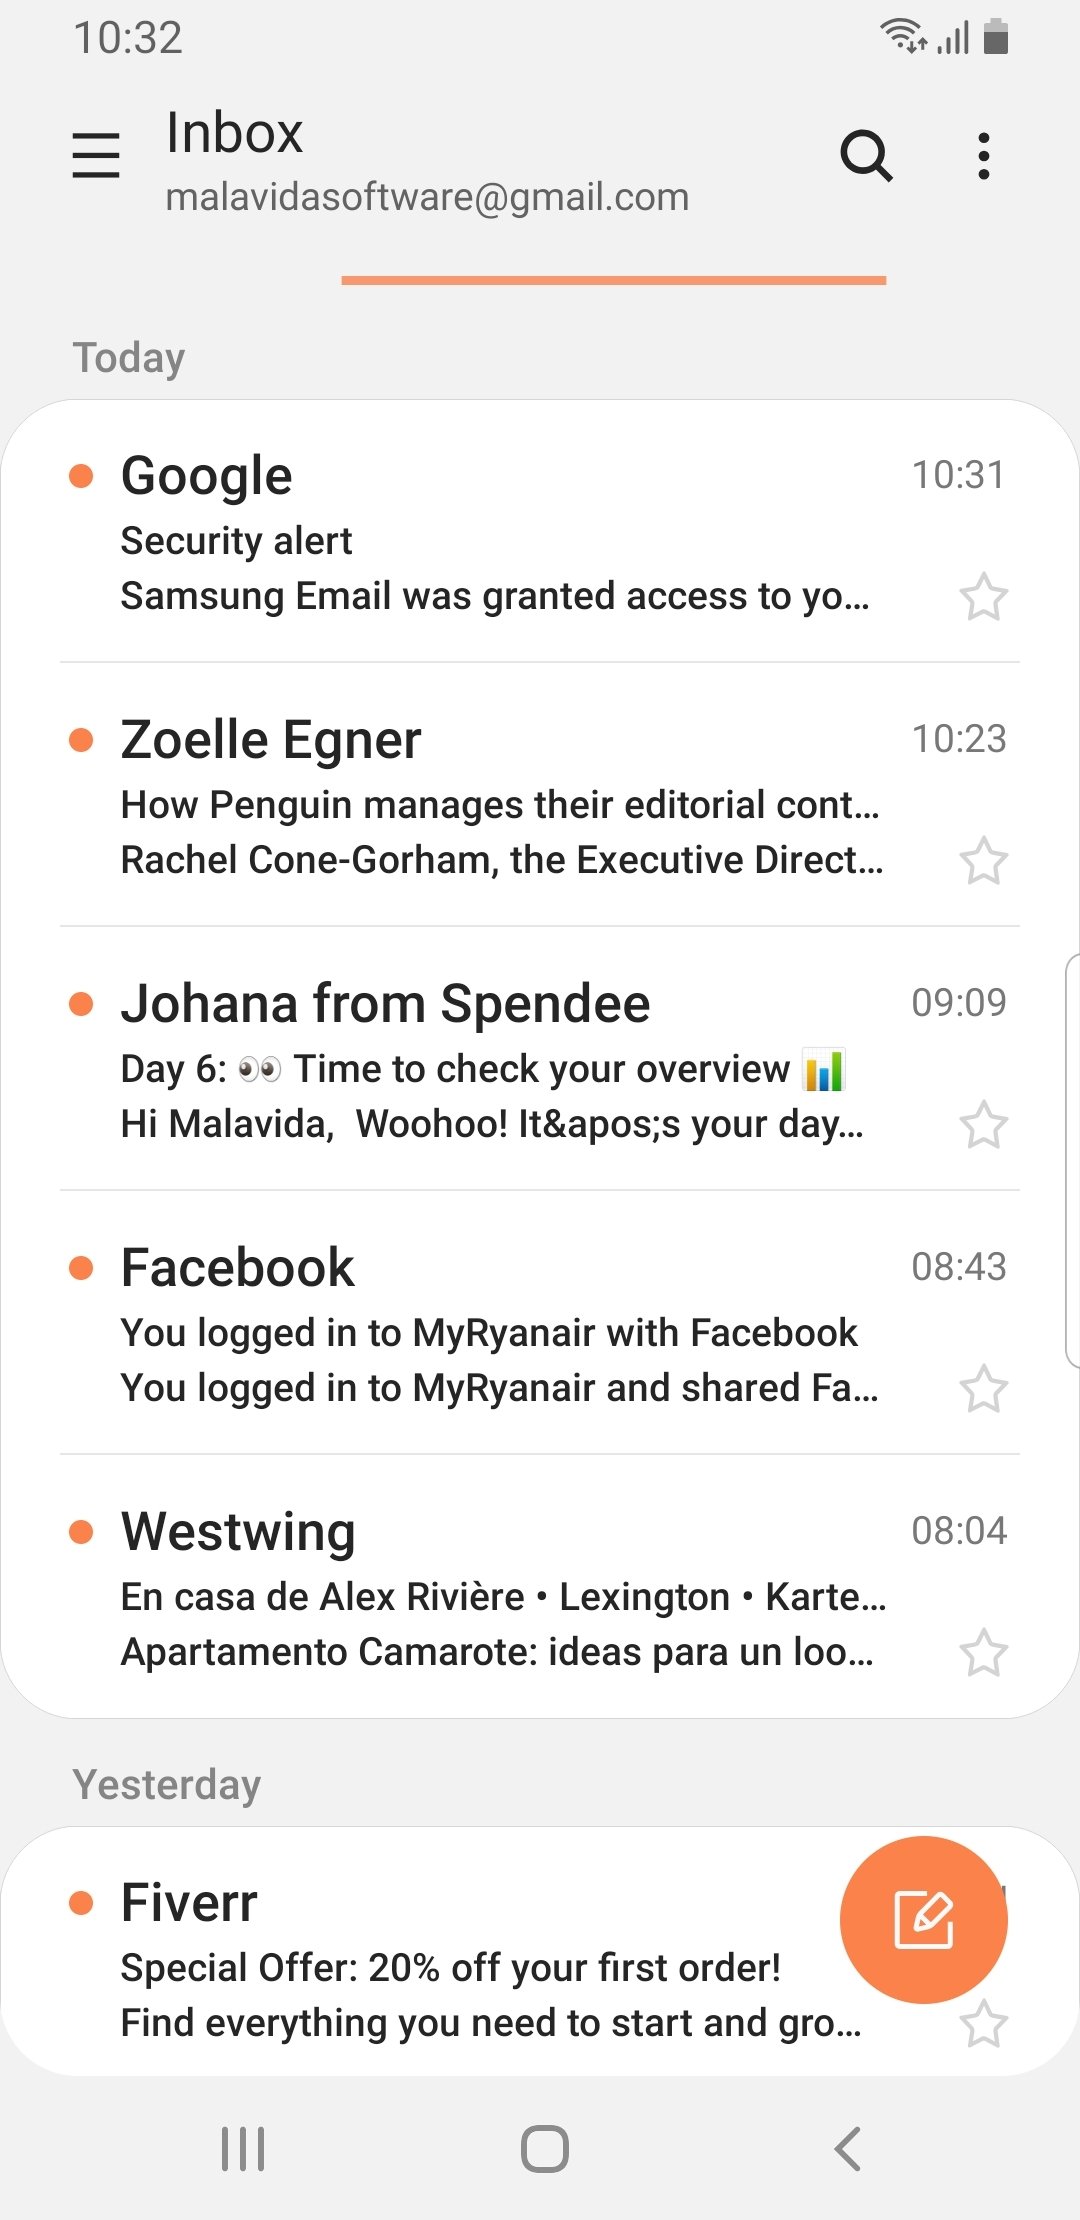 Samsung Email